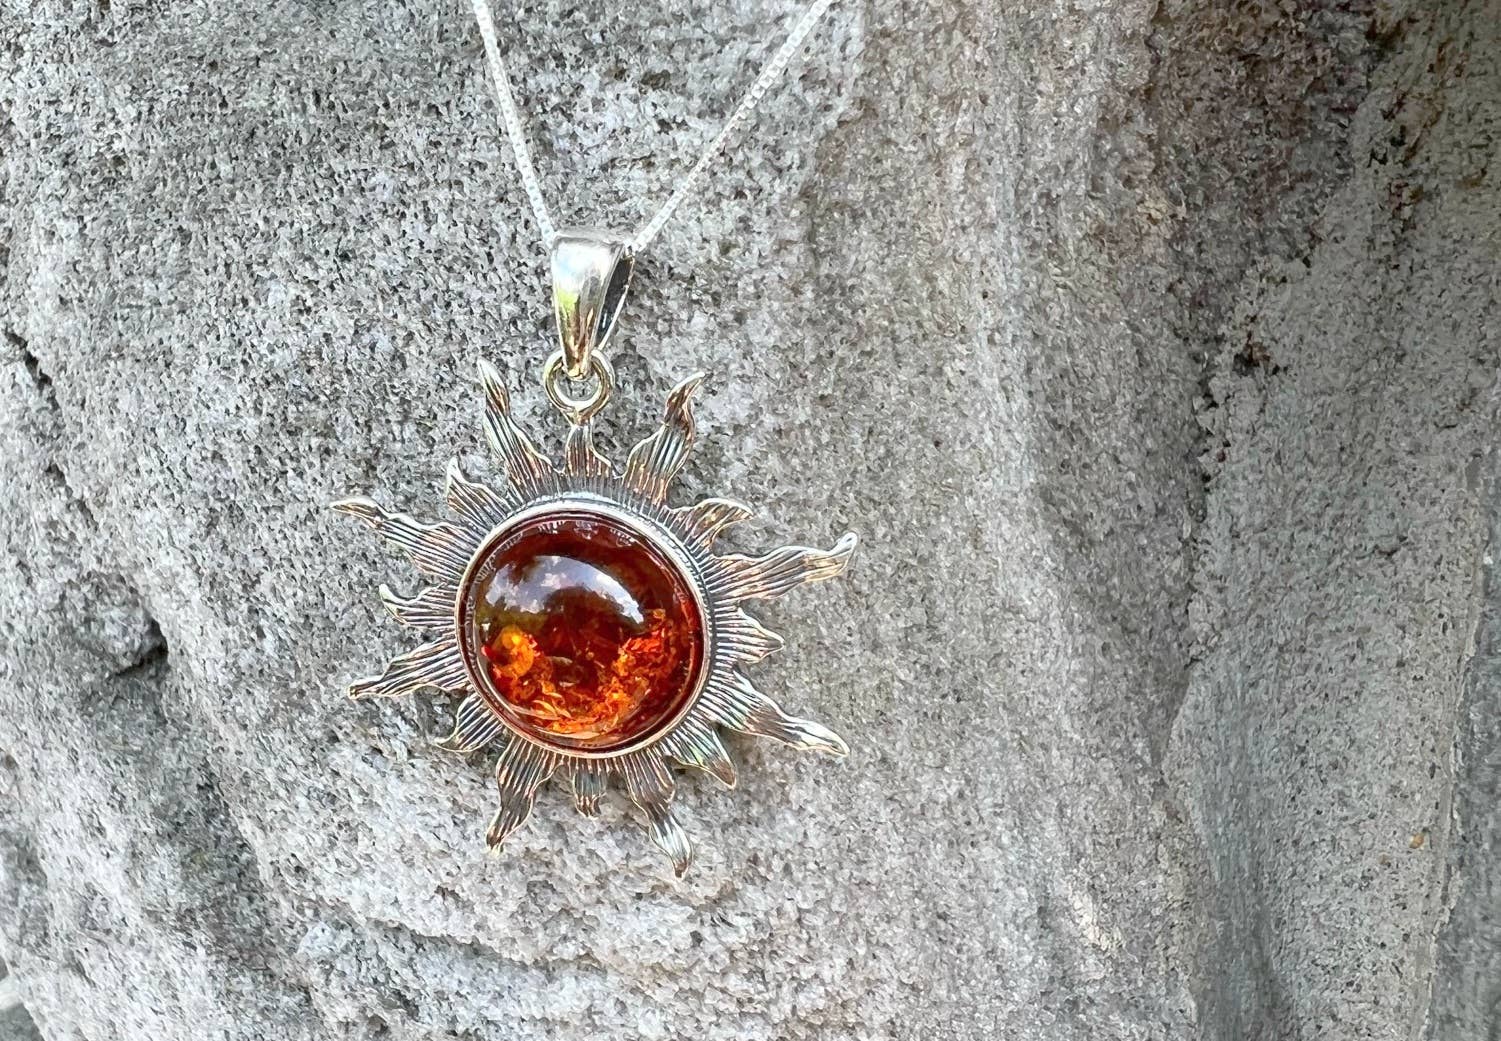 Large Radiant Sun Baltic Amber Pendant in Sterling Silver